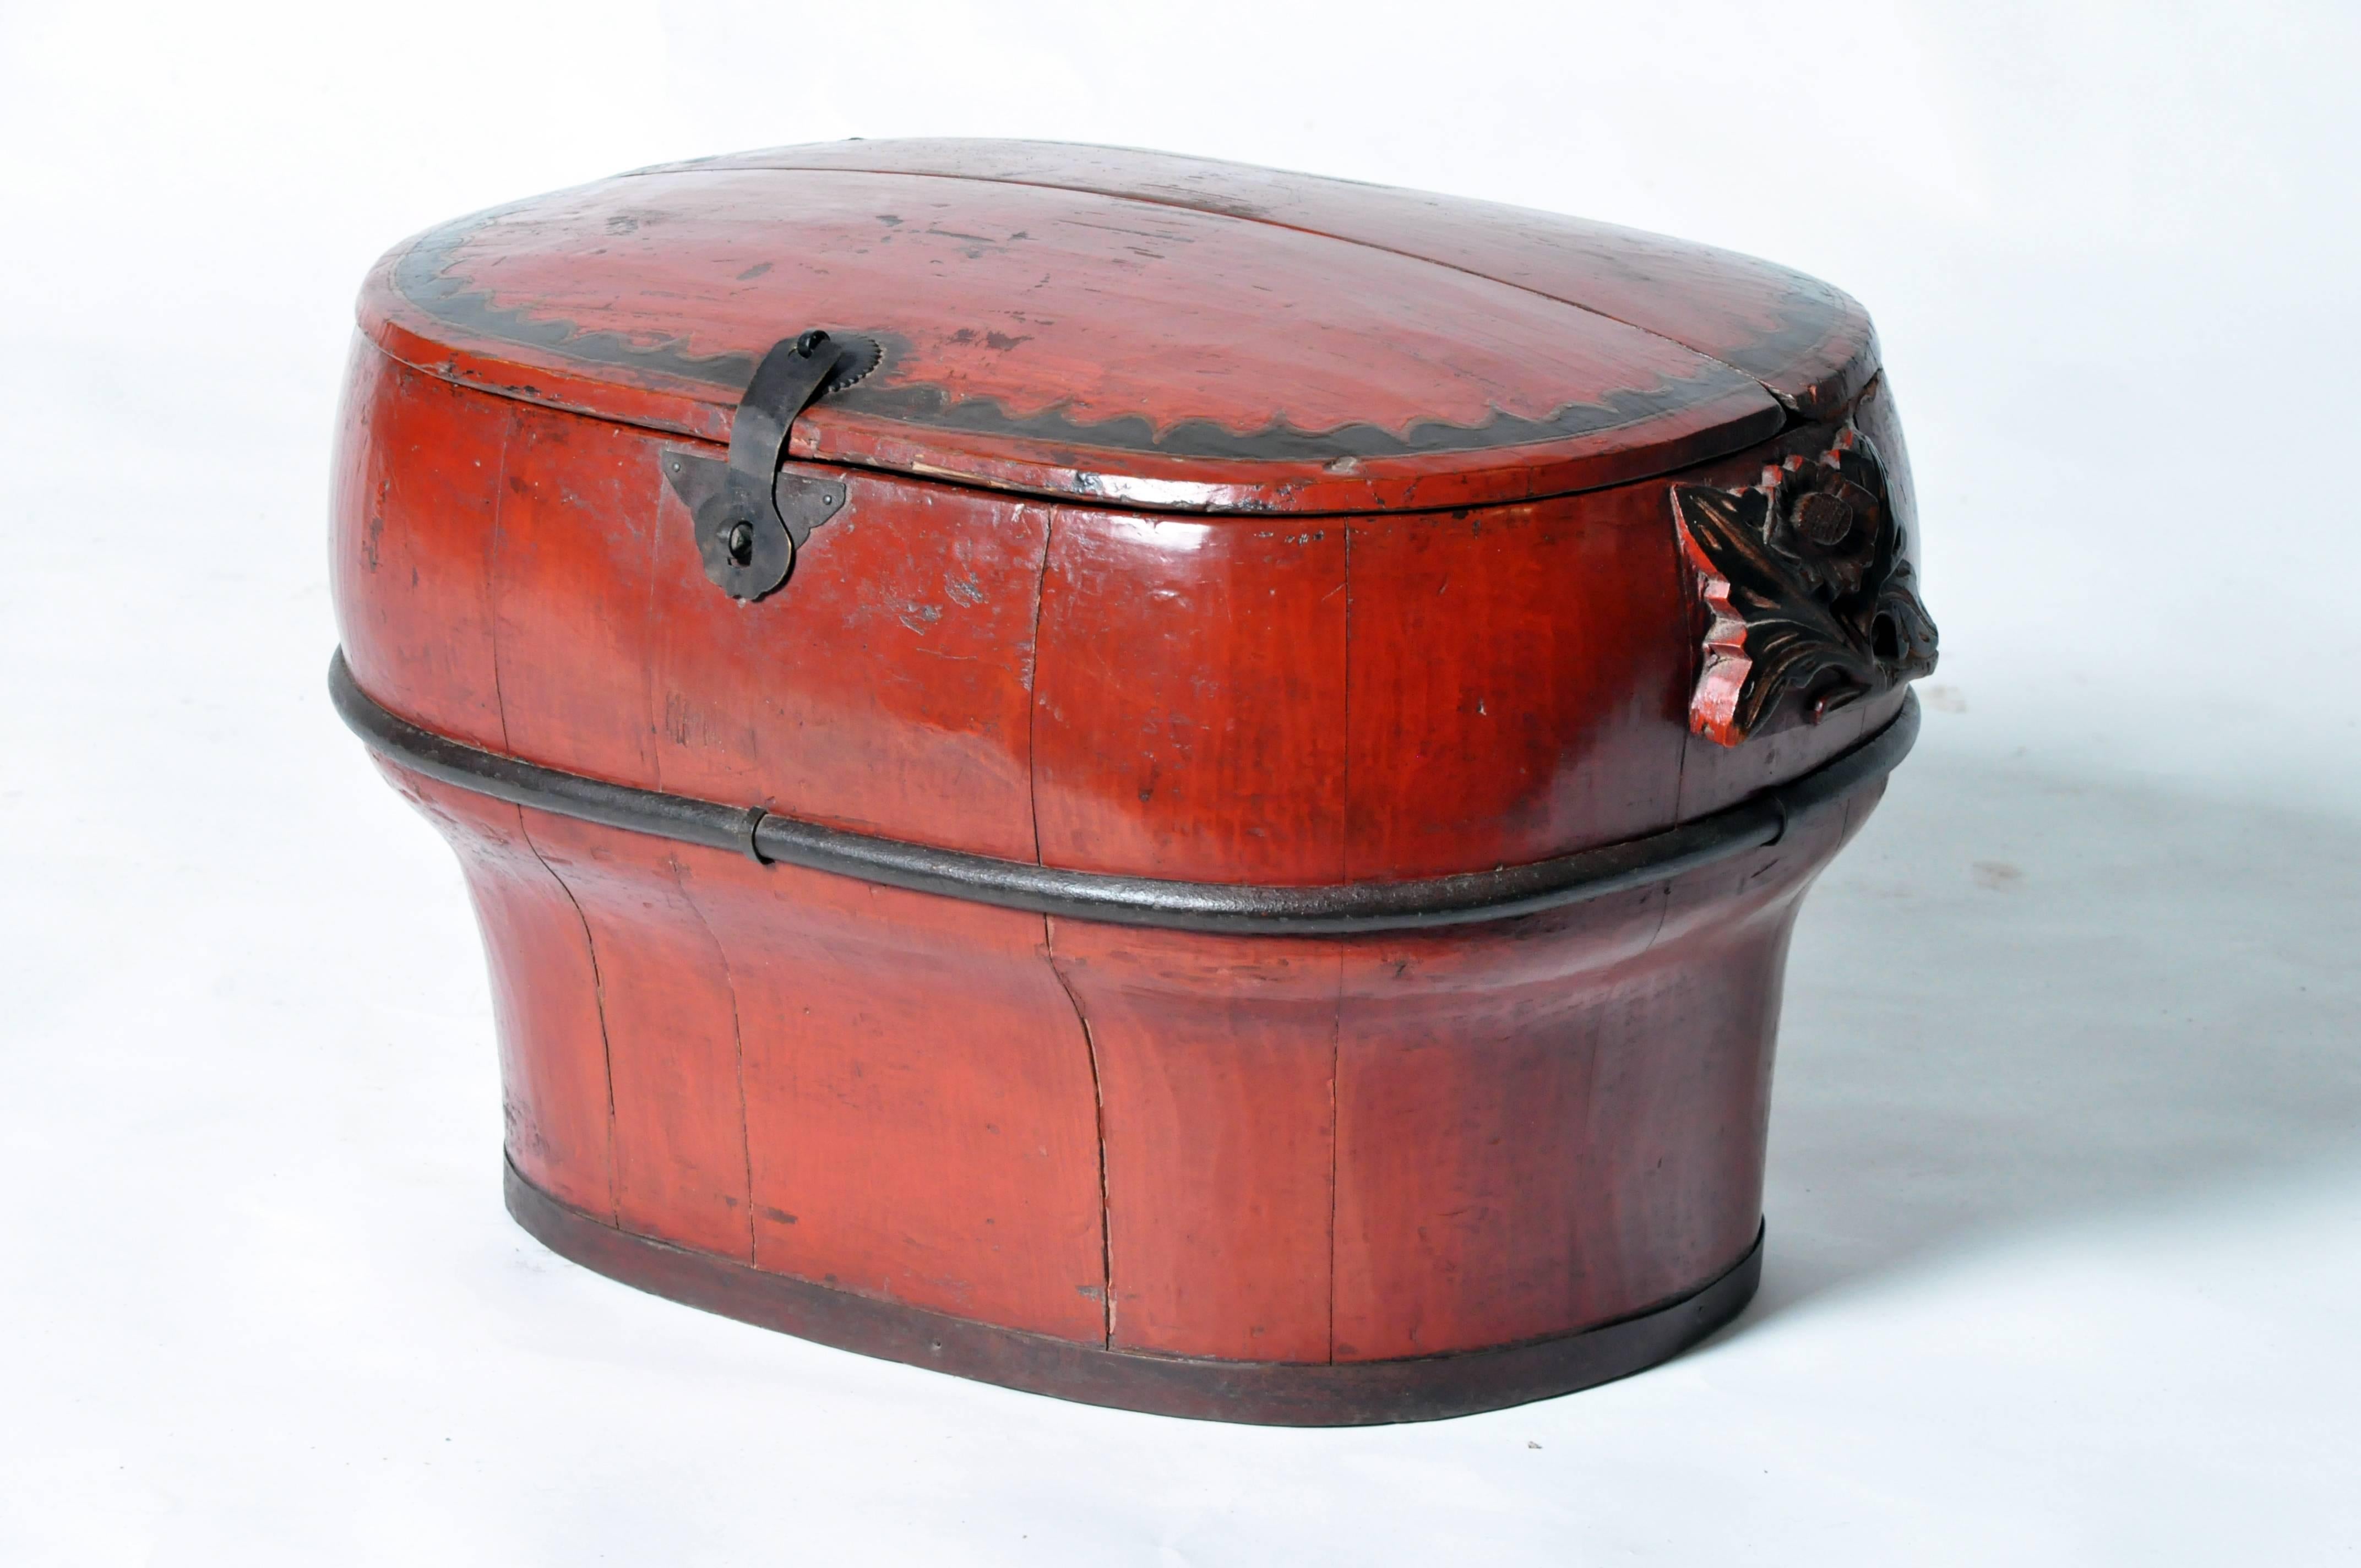 This Chinese wedding basket is from Zhejiang, China and made from softwood.